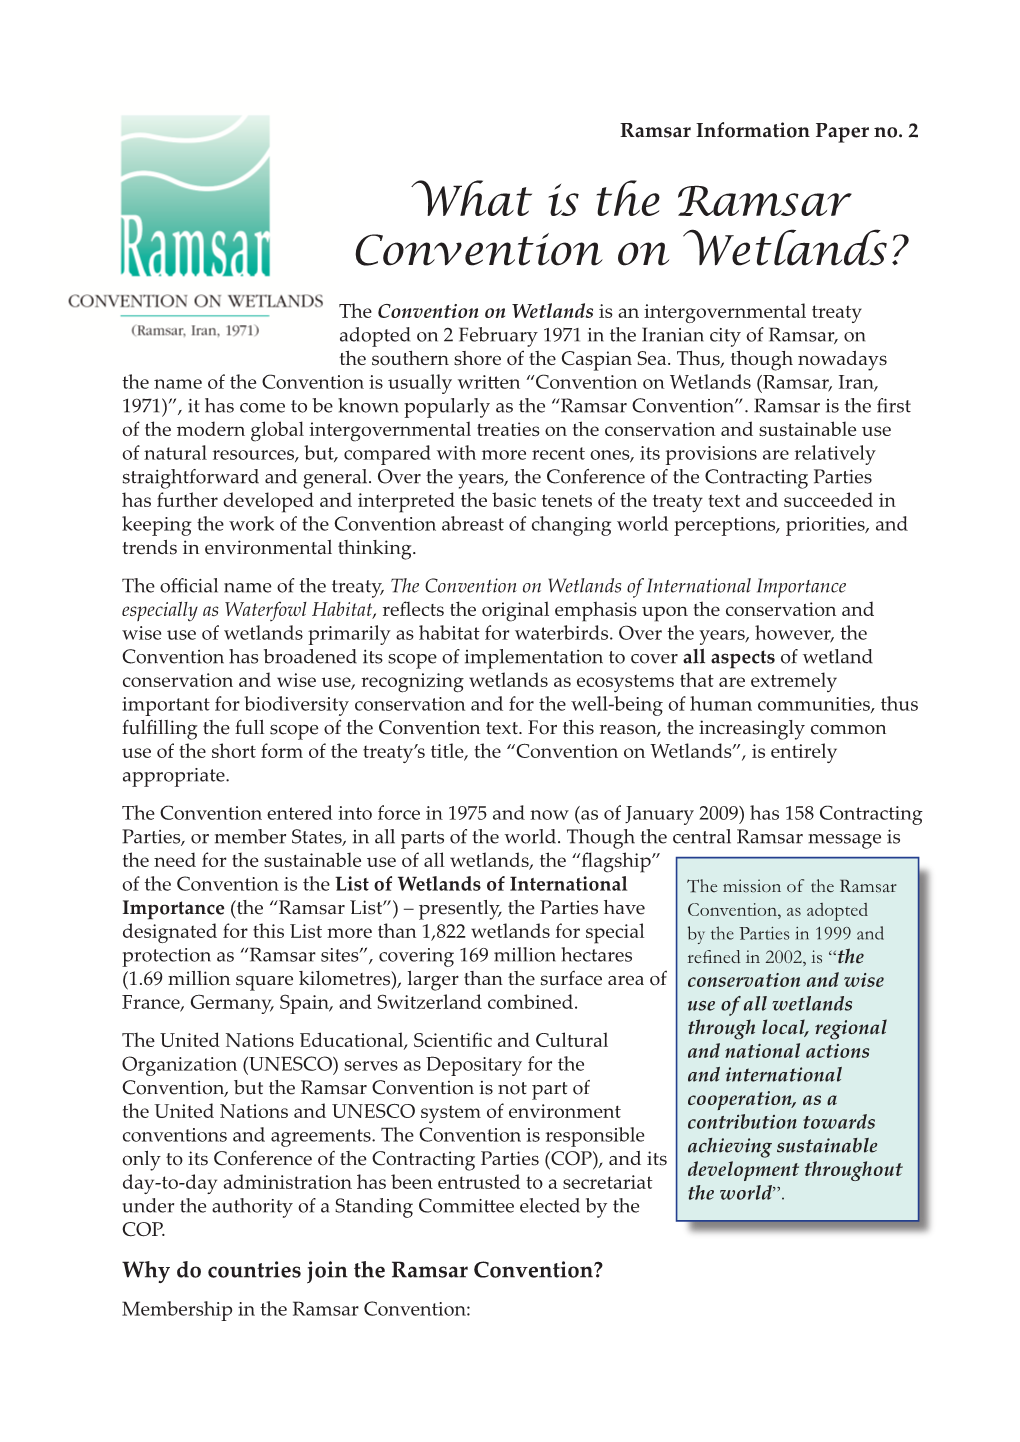 What Is the Ramsar Convention on Wetlands?